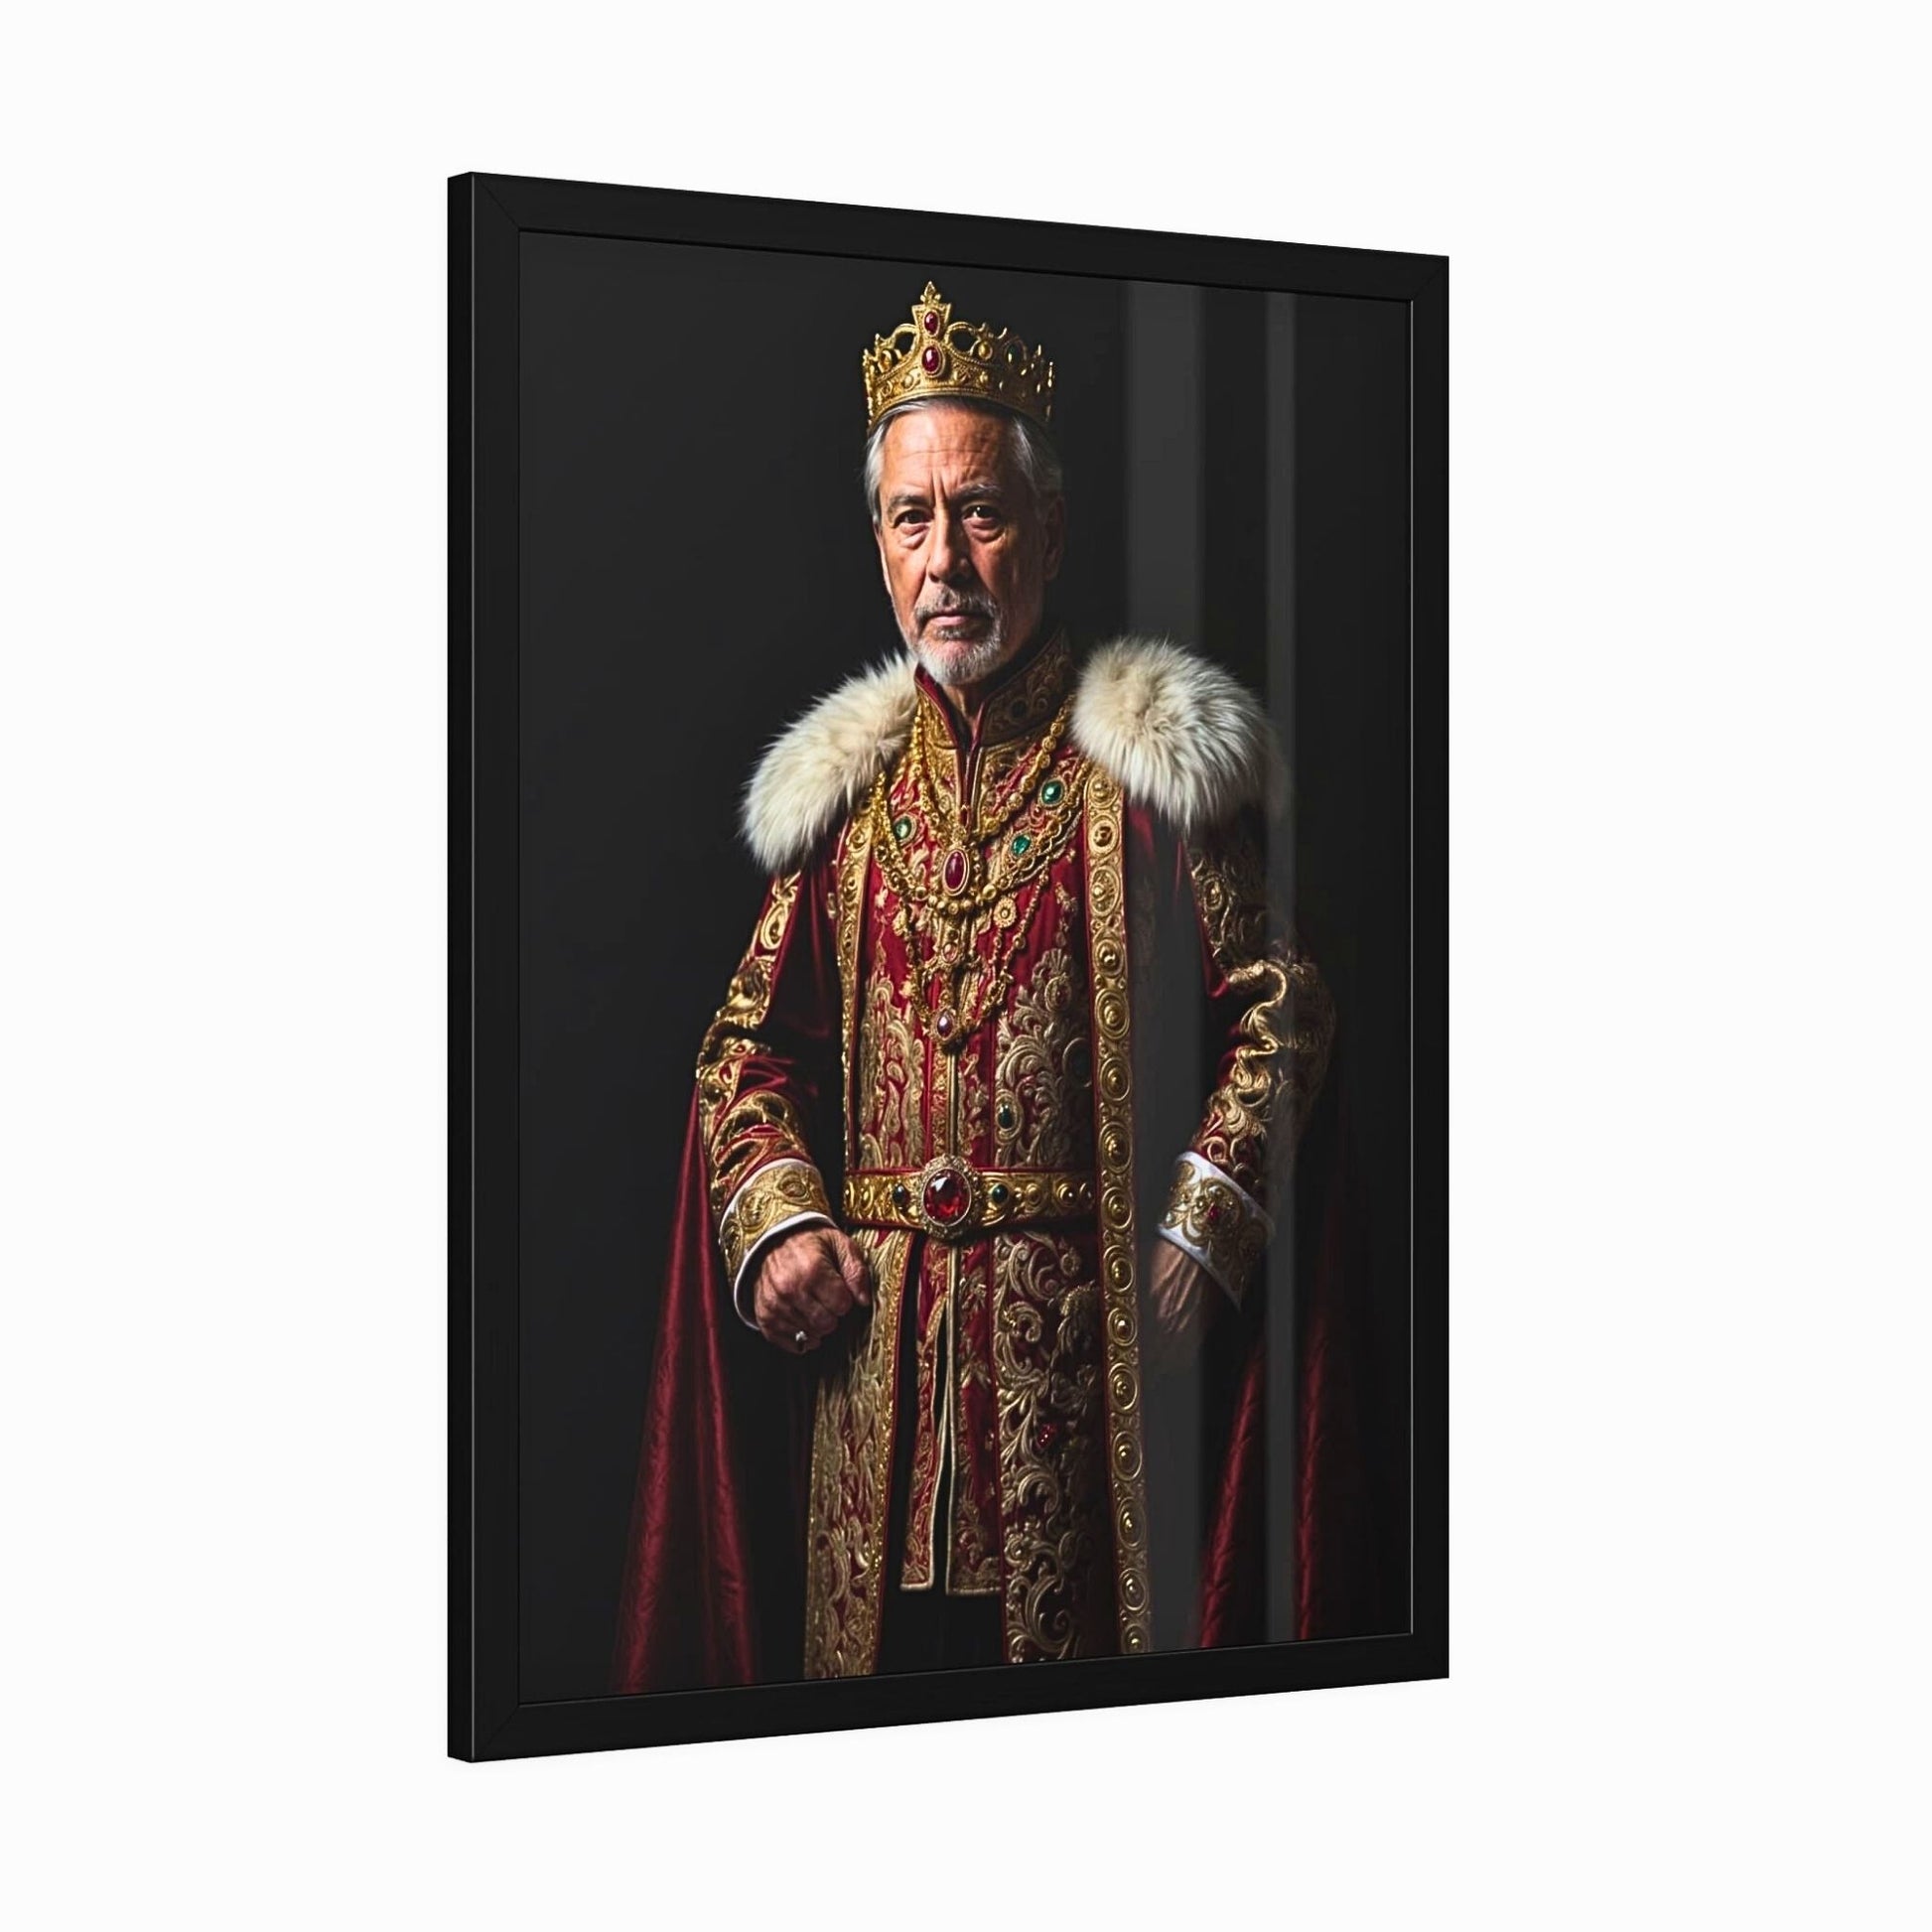 Celebrate a special occasion with a personalized king portrait, intricately designed in the style of the Renaissance. This custom royal portrait, suitable for birthdays and more, makes a thoughtful gift for him. With its historical charm and digital download availability, it's a timeless expression of regal sophistication that he'll cherish forever.